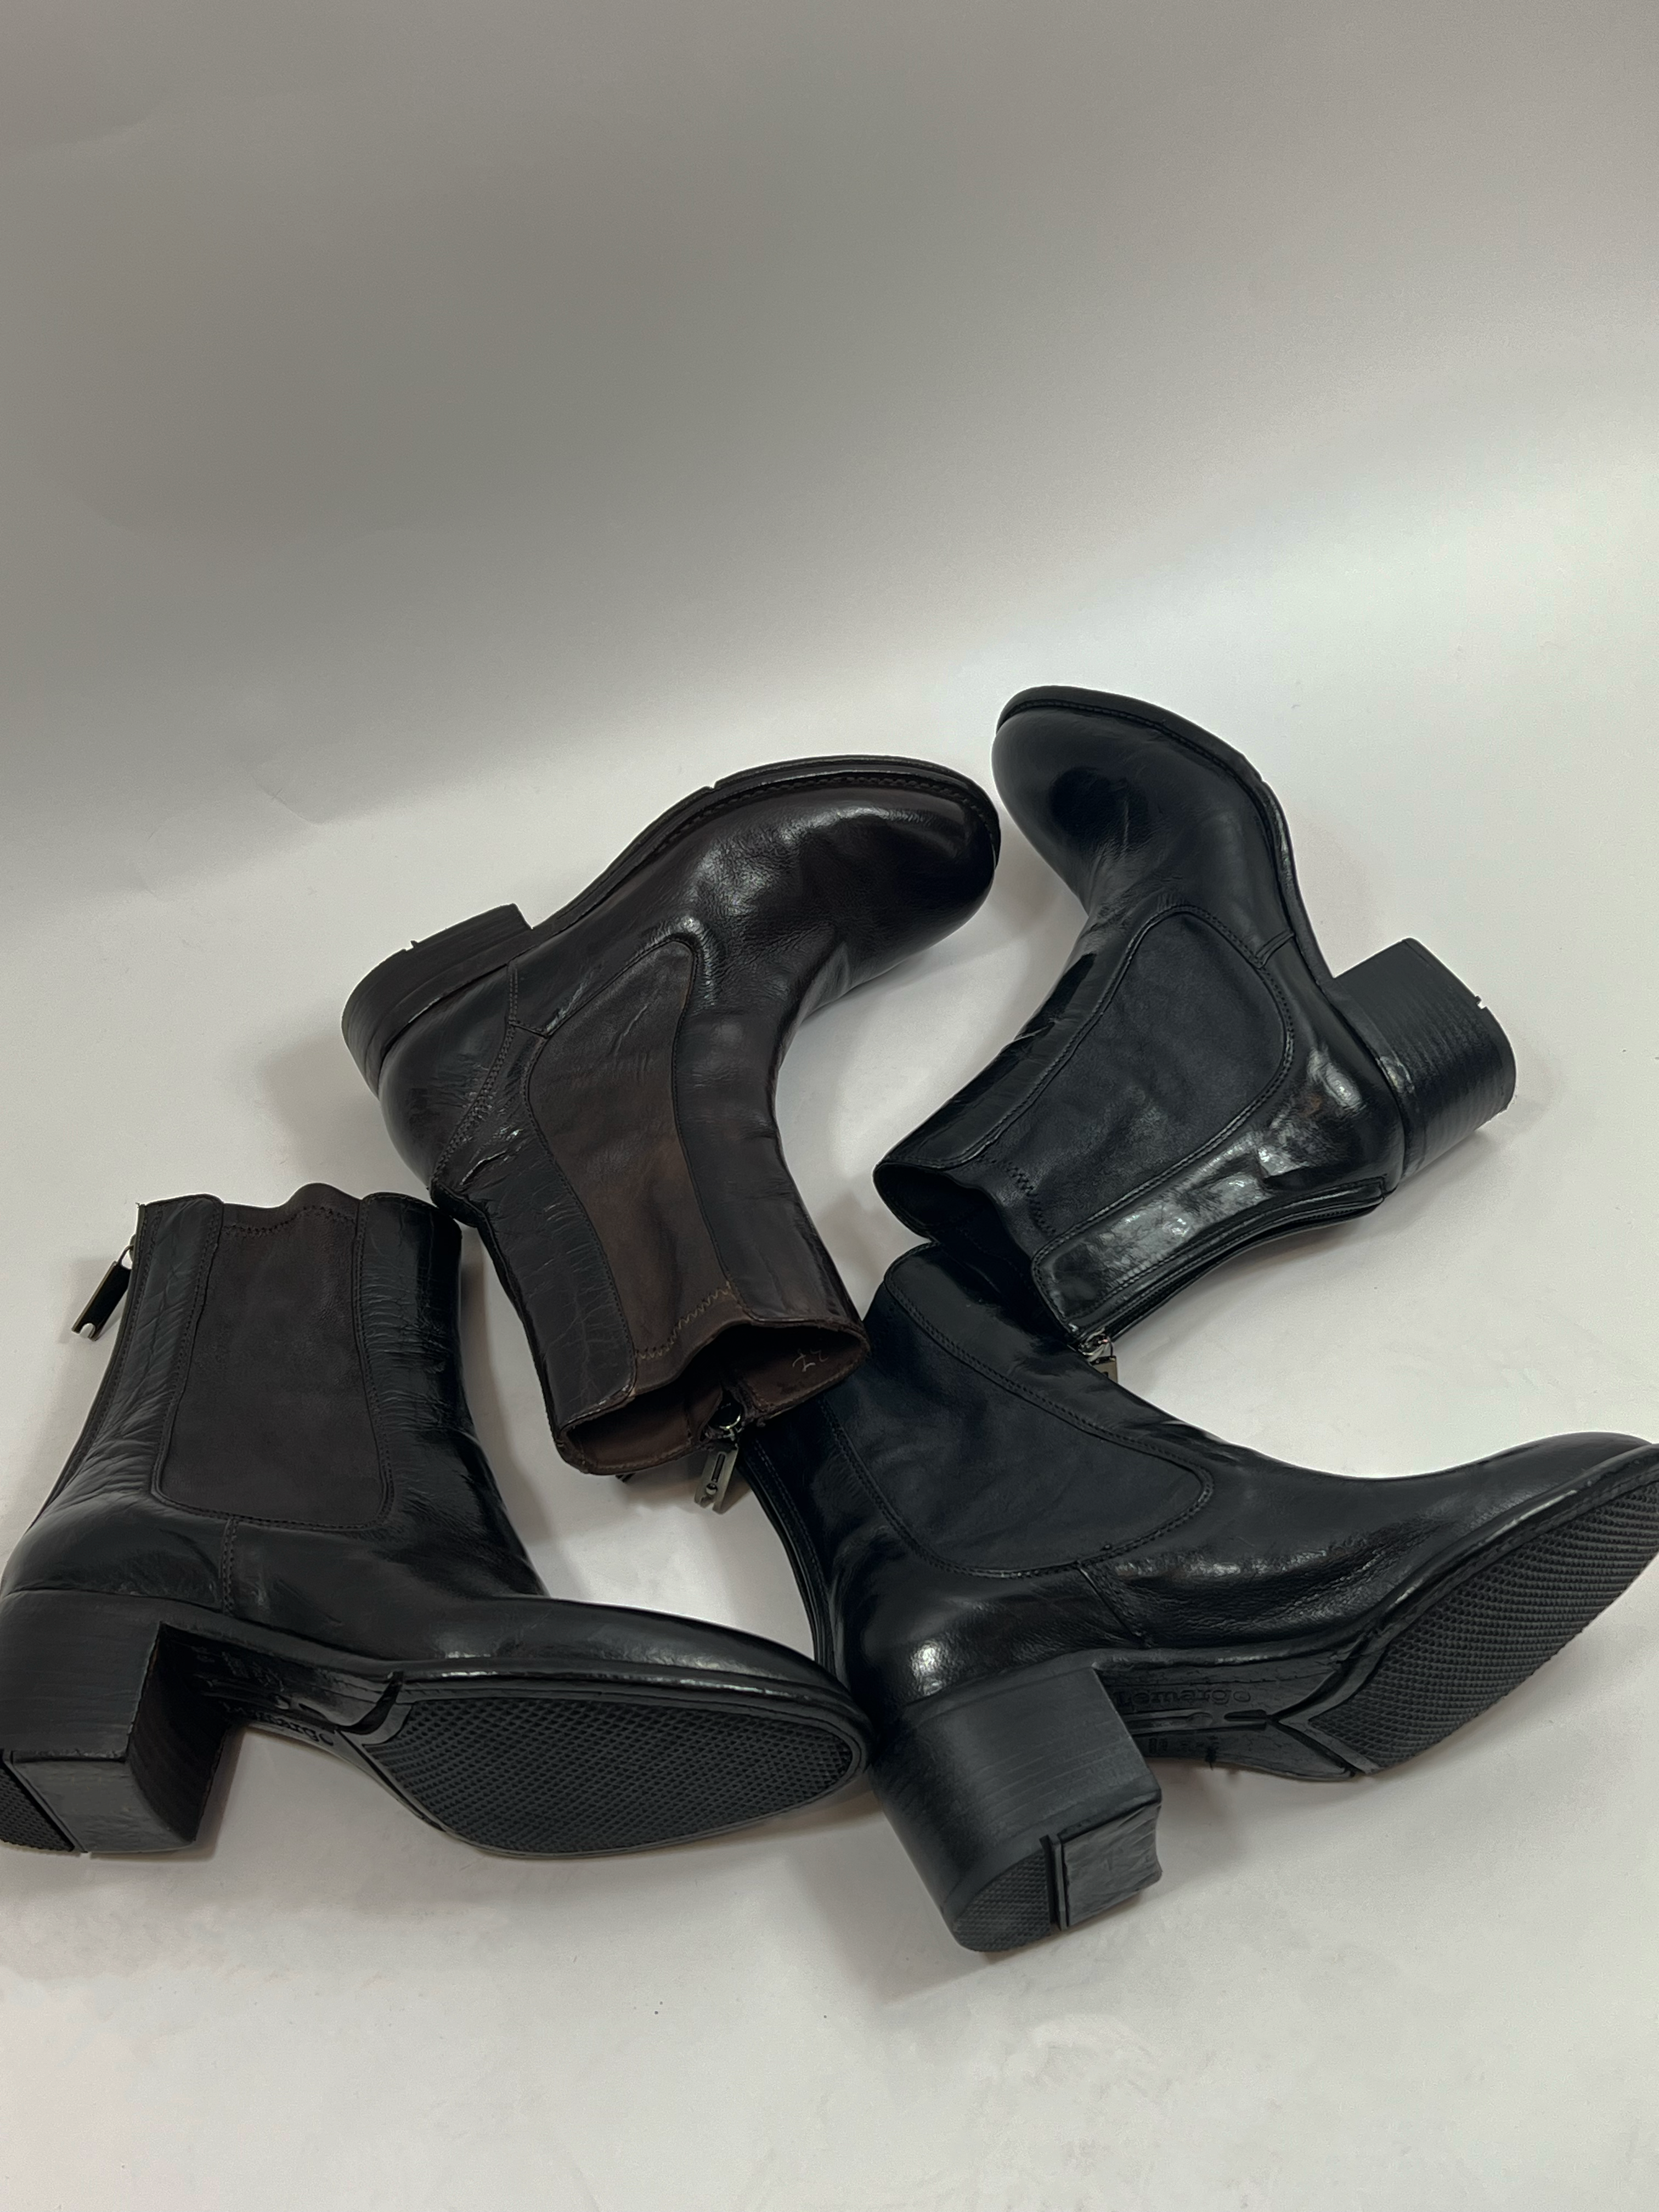 Norma chelsea boots, black leather